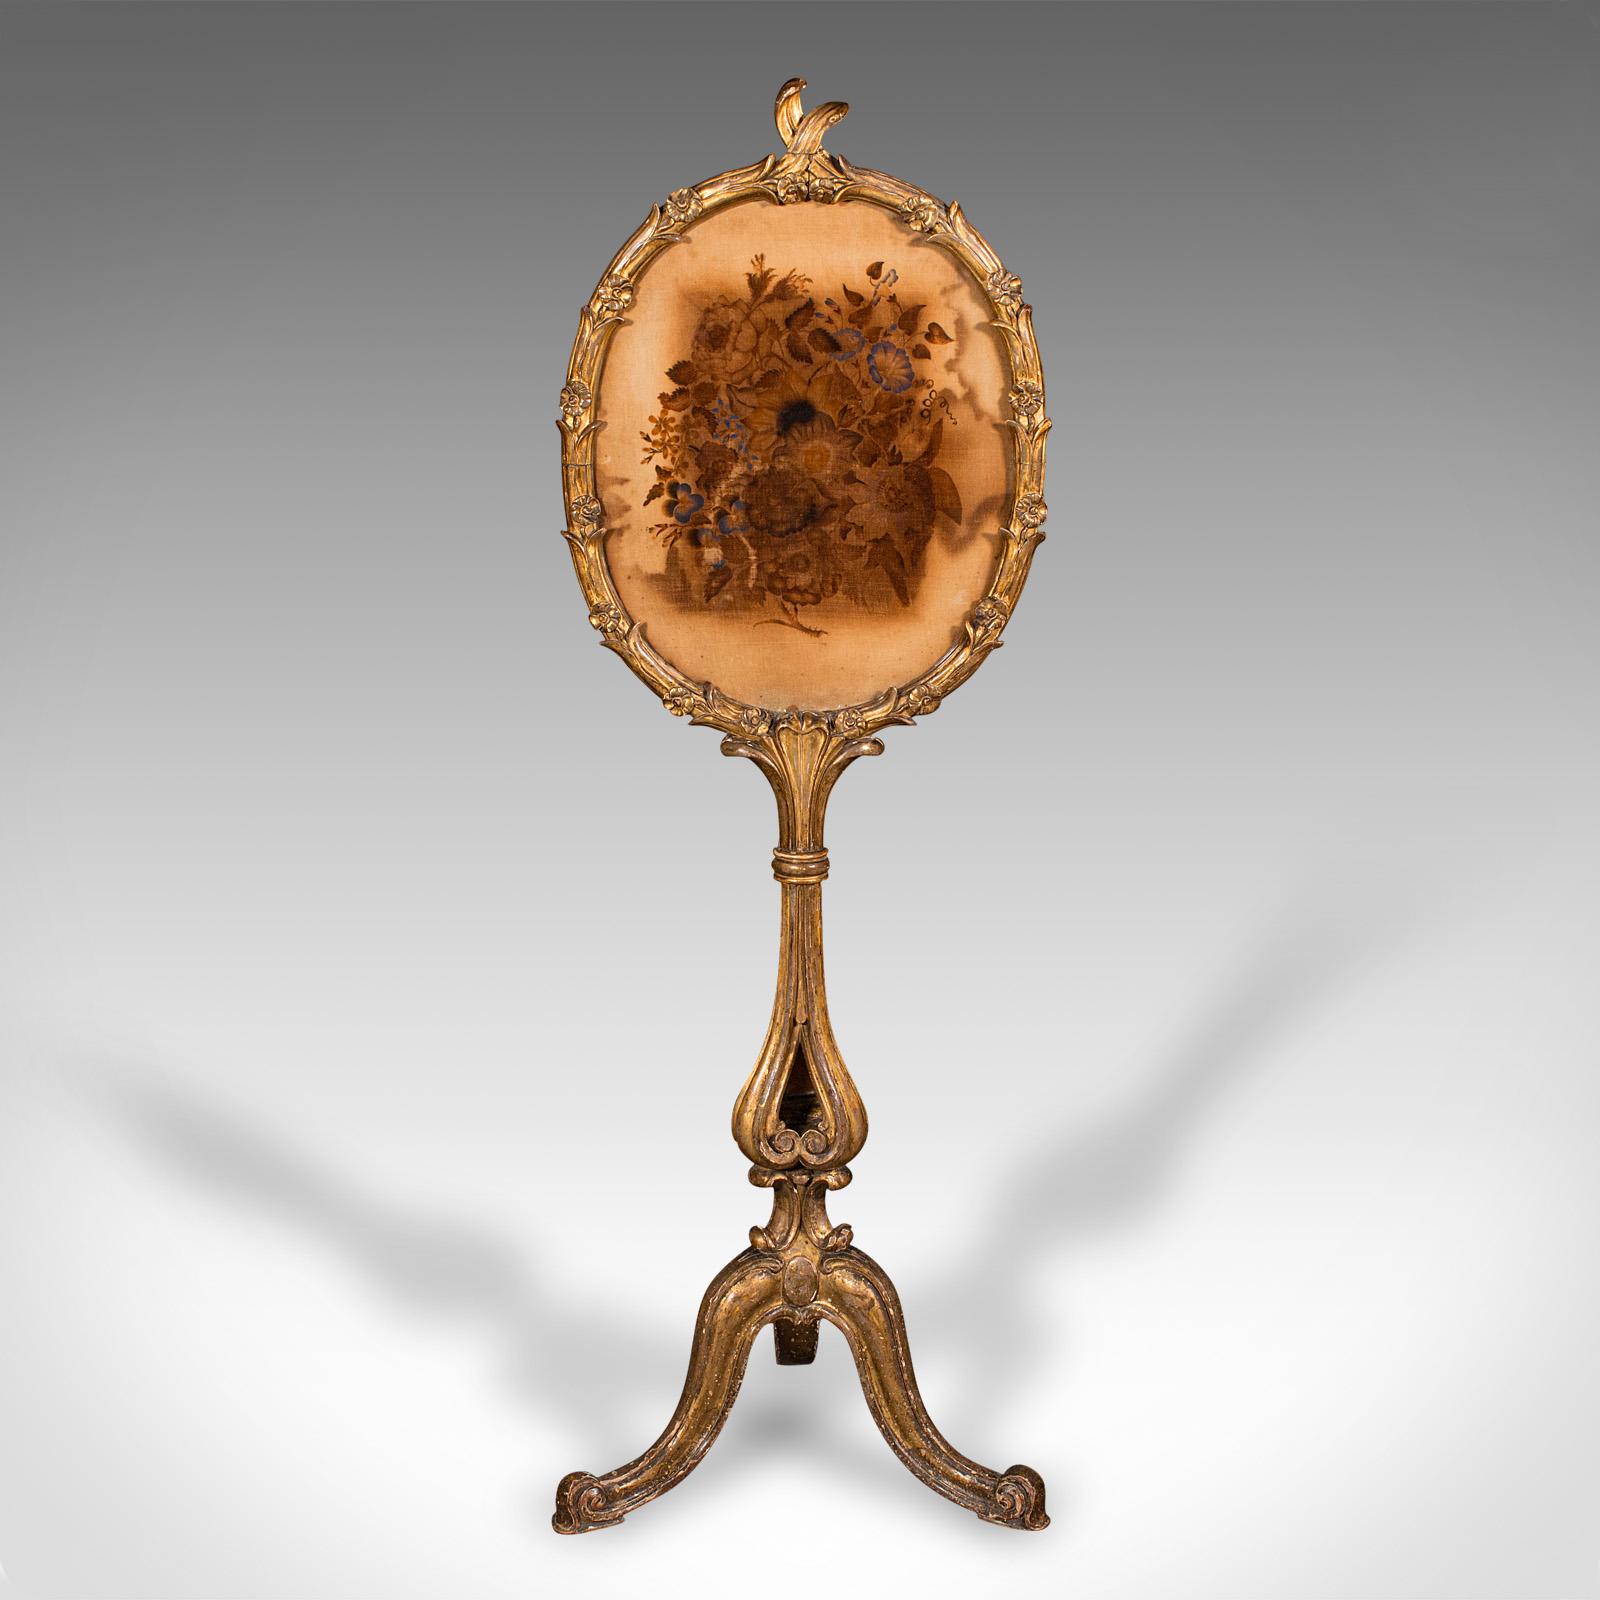 
This is an antique pole screen. An English, giltwood and glass fireside reflector, dating to the Regency period, circa 1820.

Fine Regency craftsmanship with a Dutch influence to the decor
Displays a desirable aged patina and in good order - small